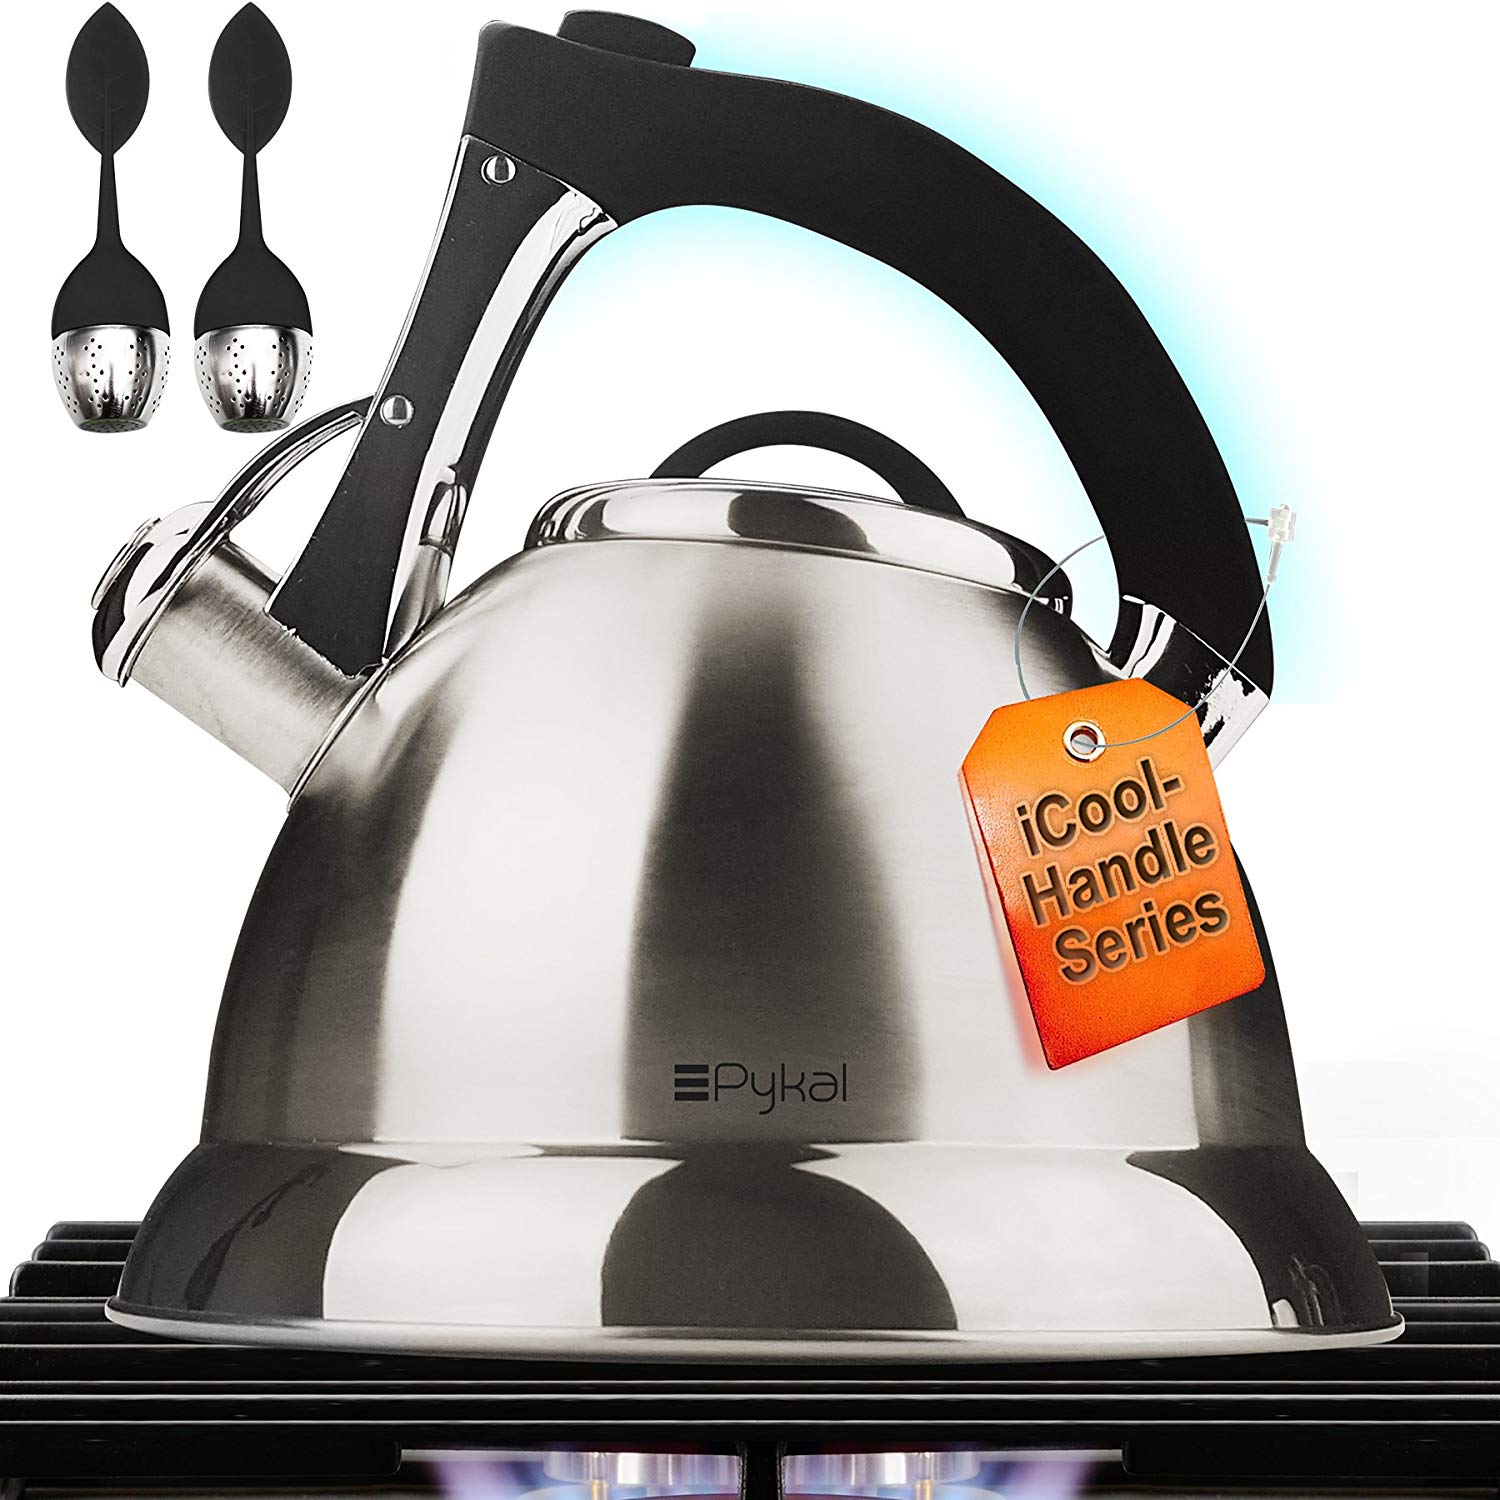 Pykal Whistling Tea Kettle with iCool 